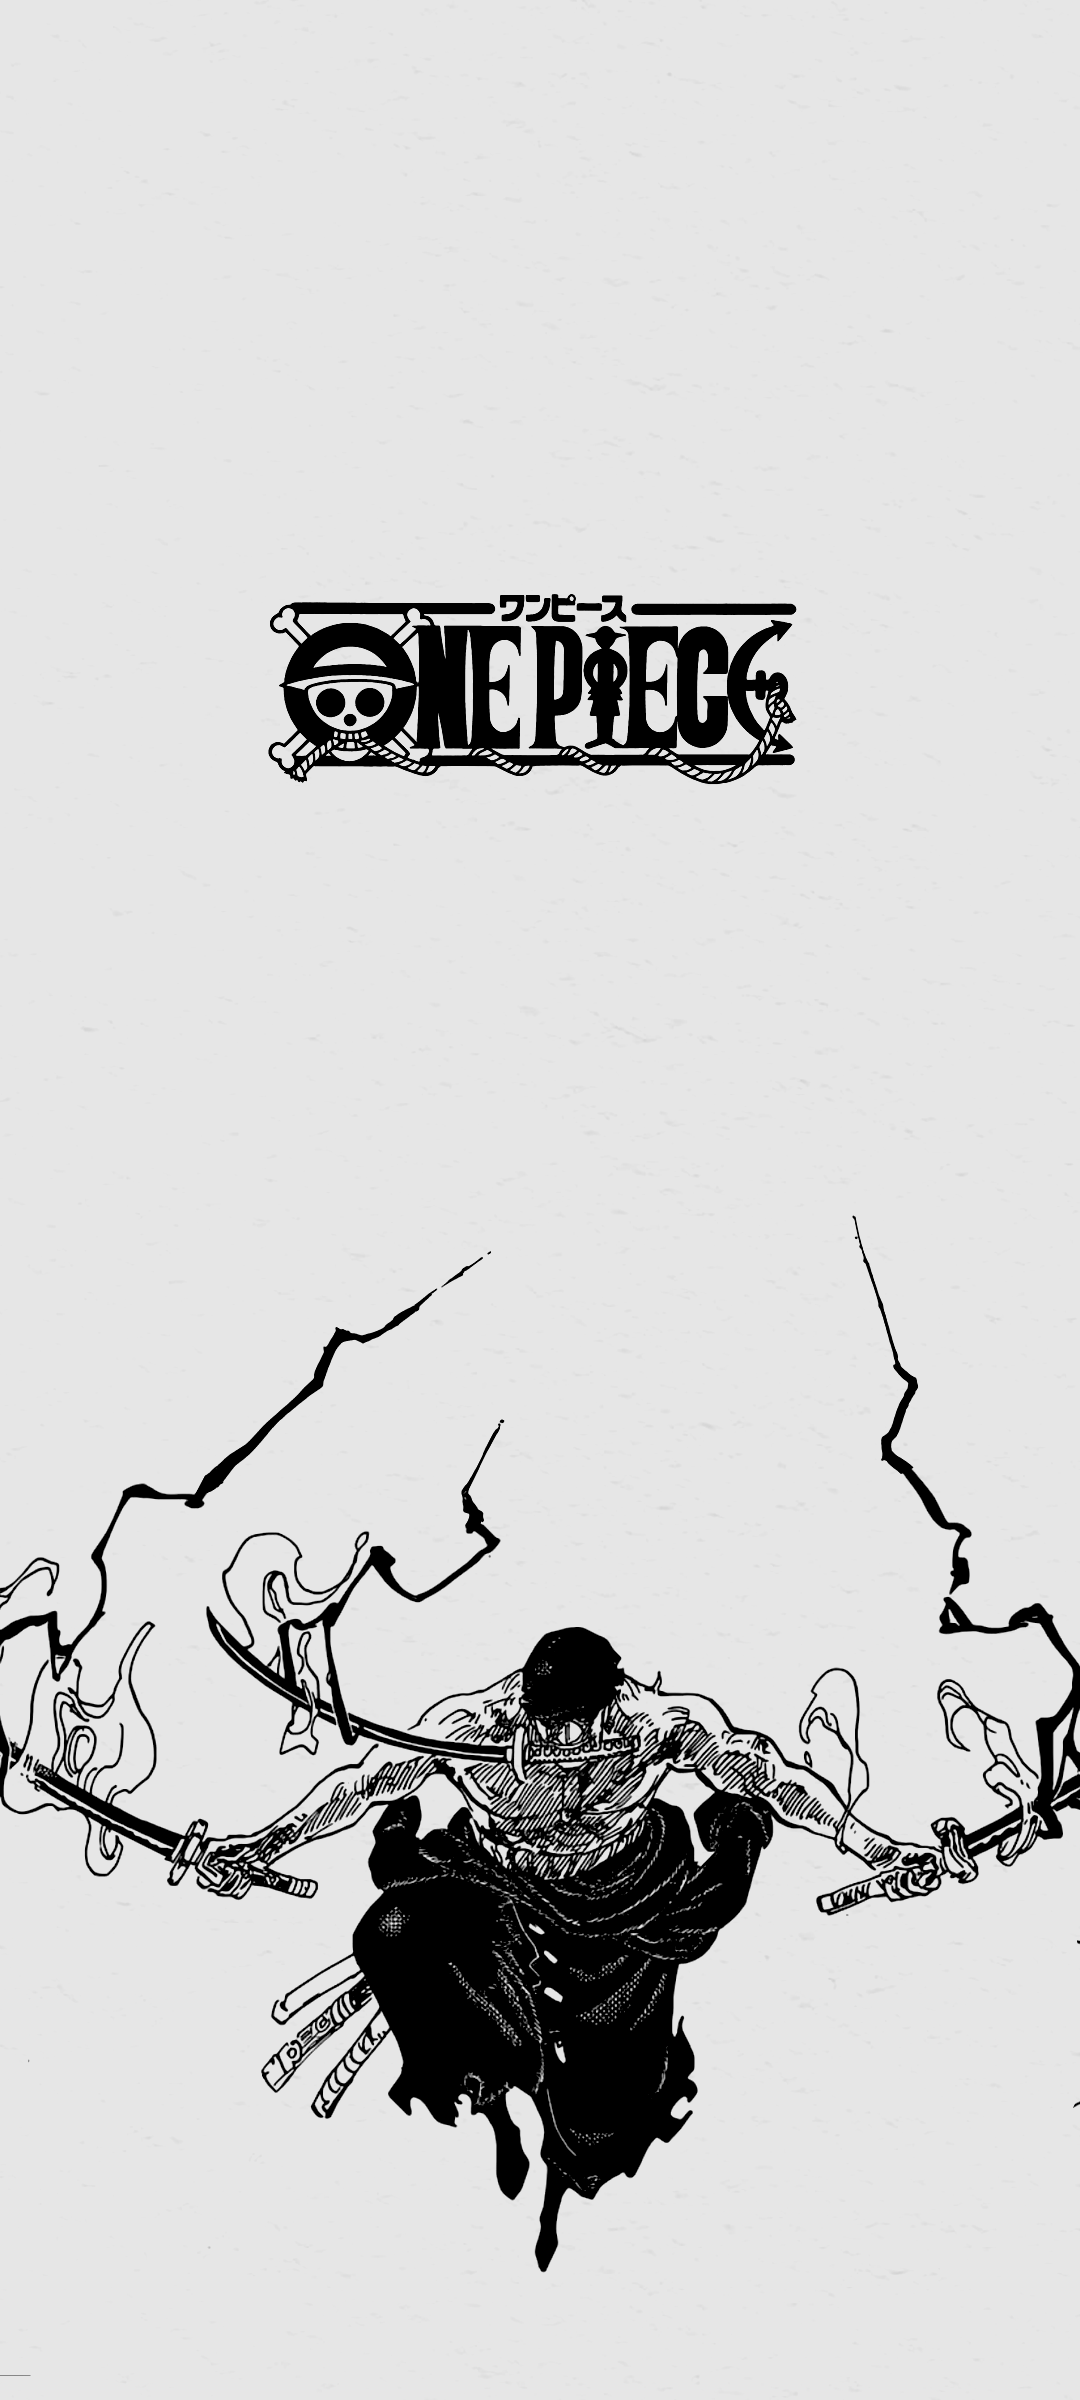 I really love this panel. Can't help to make a wallpaper from it. Following some wallpaper trend that already posted here